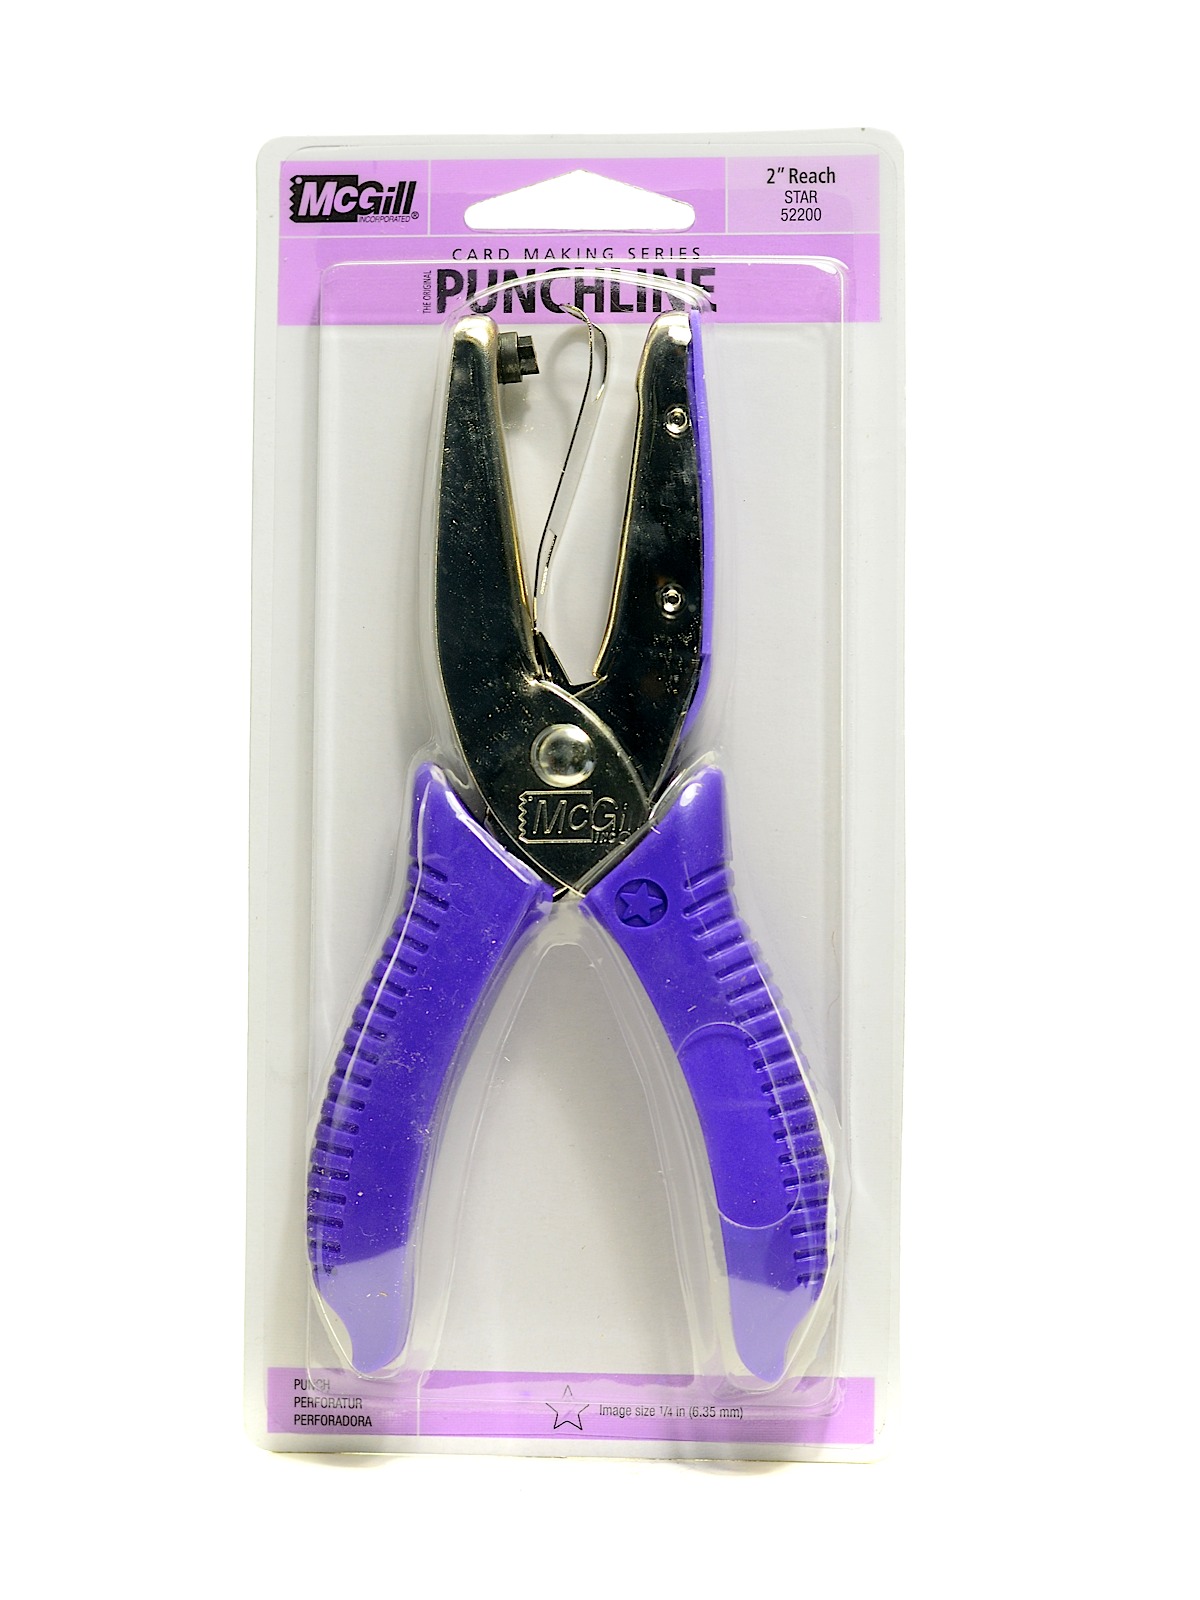 Punchline Hand-held Punches Star 1 4 In. 2 In. Reach